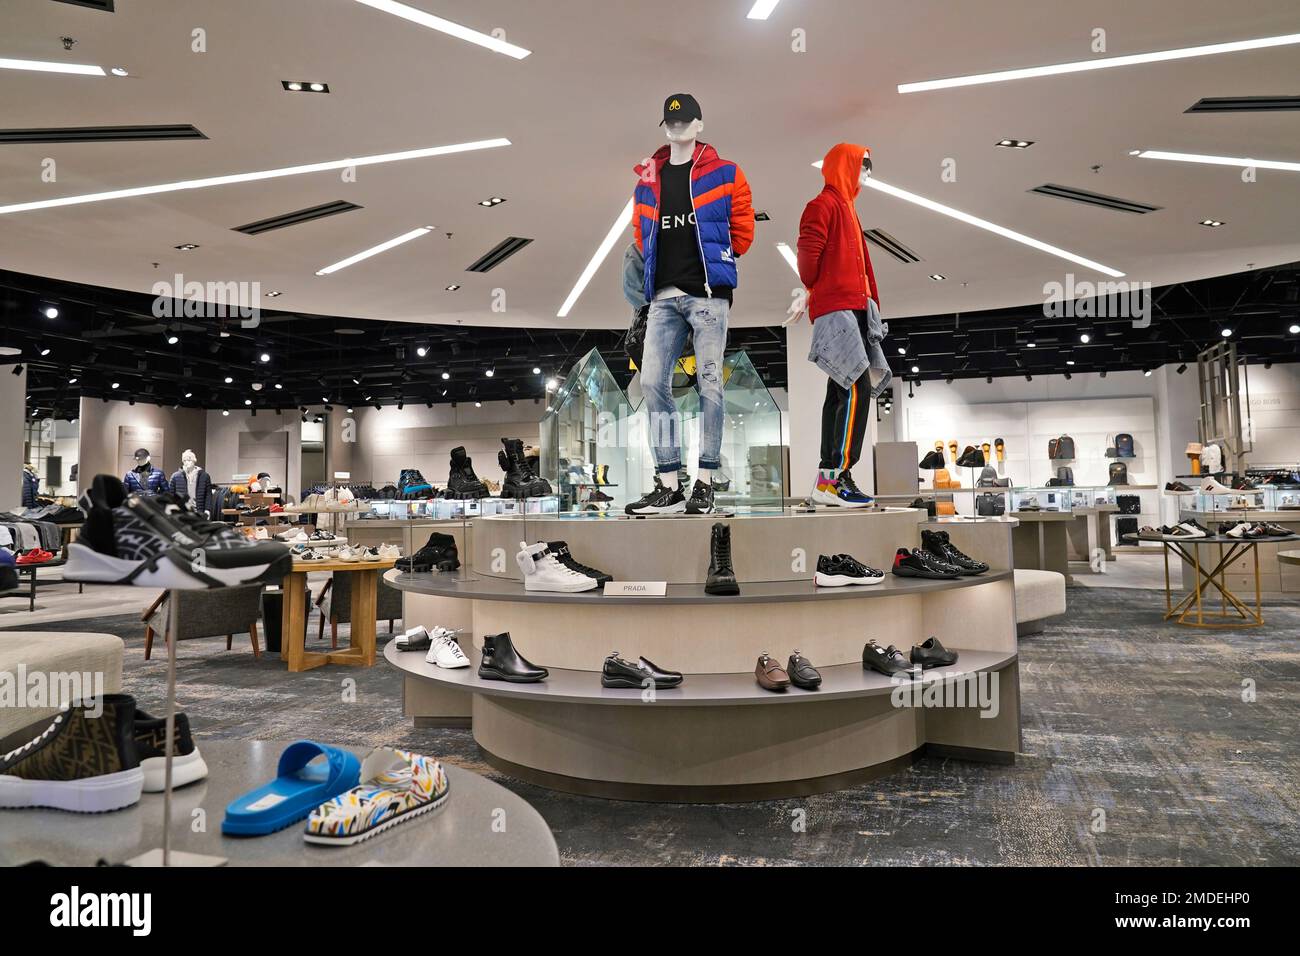 American Dream mall opens luxury wing today including Saks Fifth Avenue's  return to N.J. 